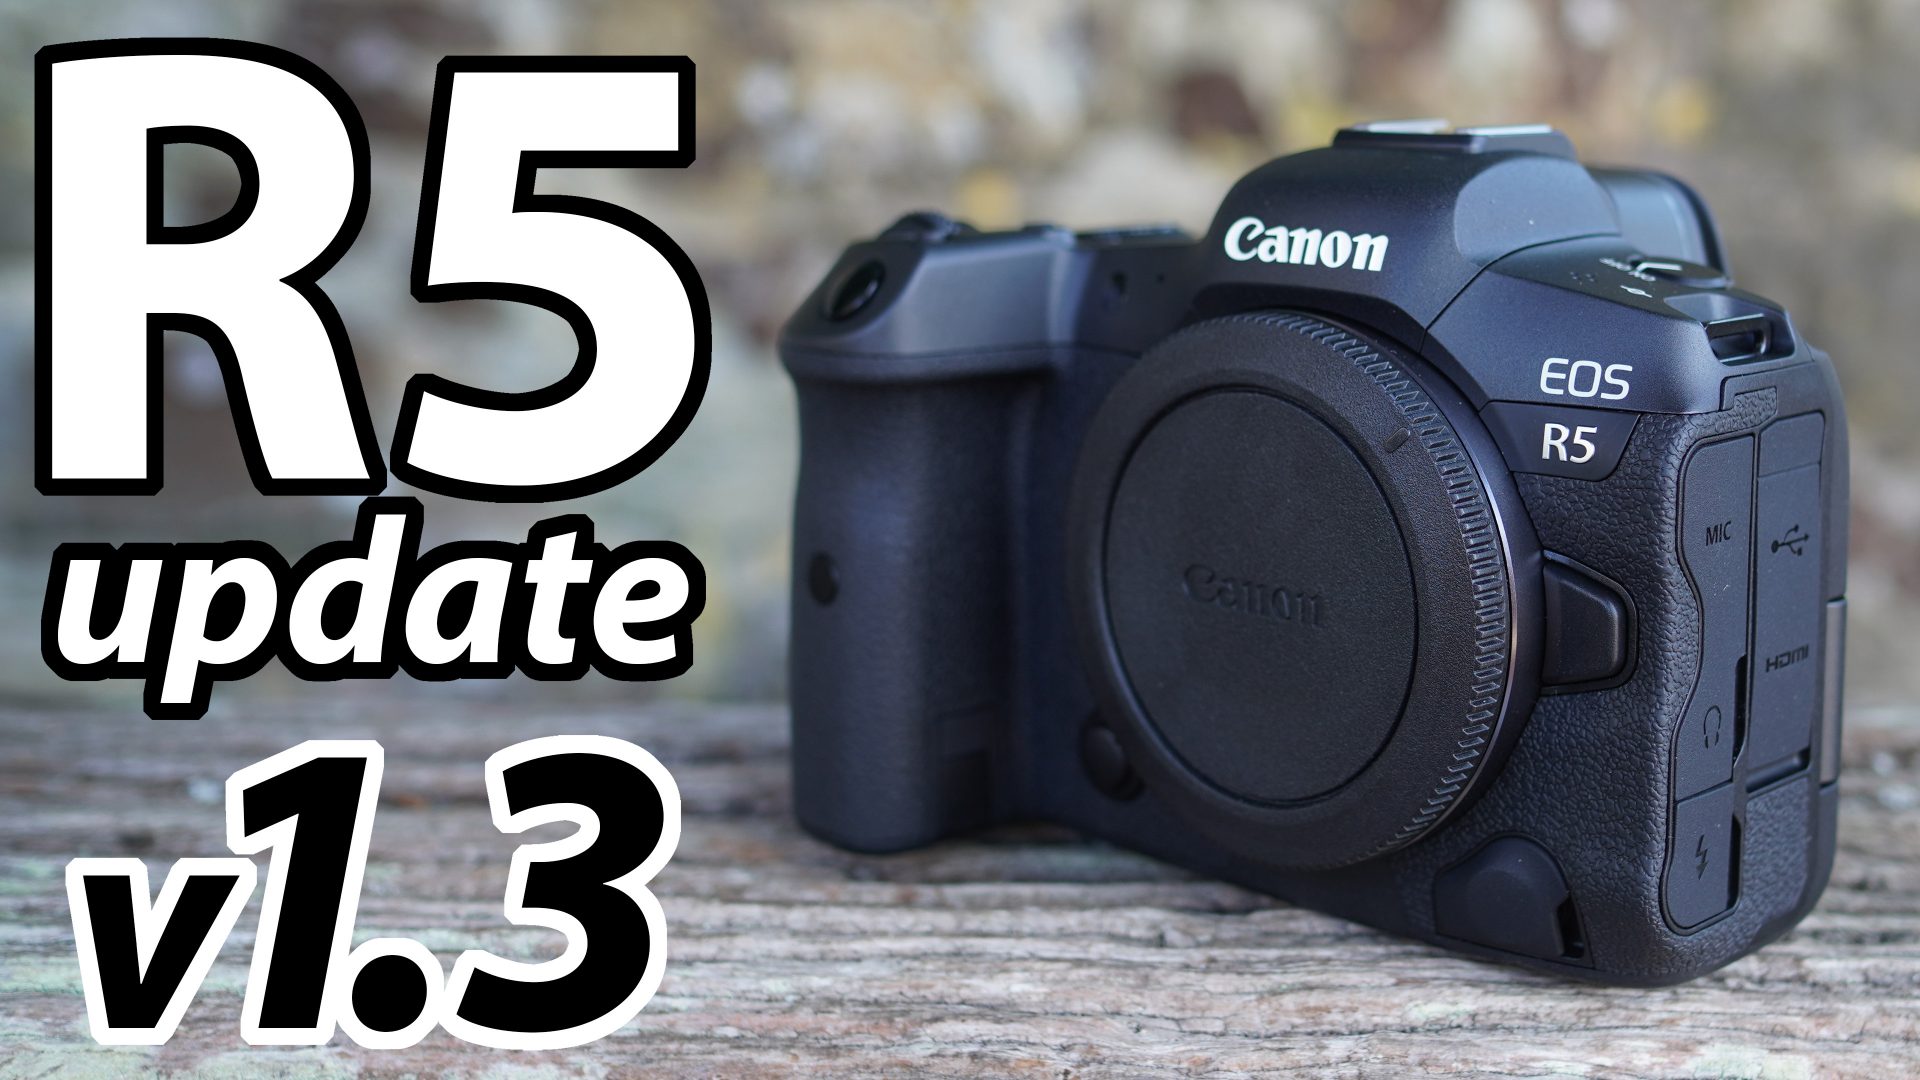 canon-eos-r5-firmware-1-3-update